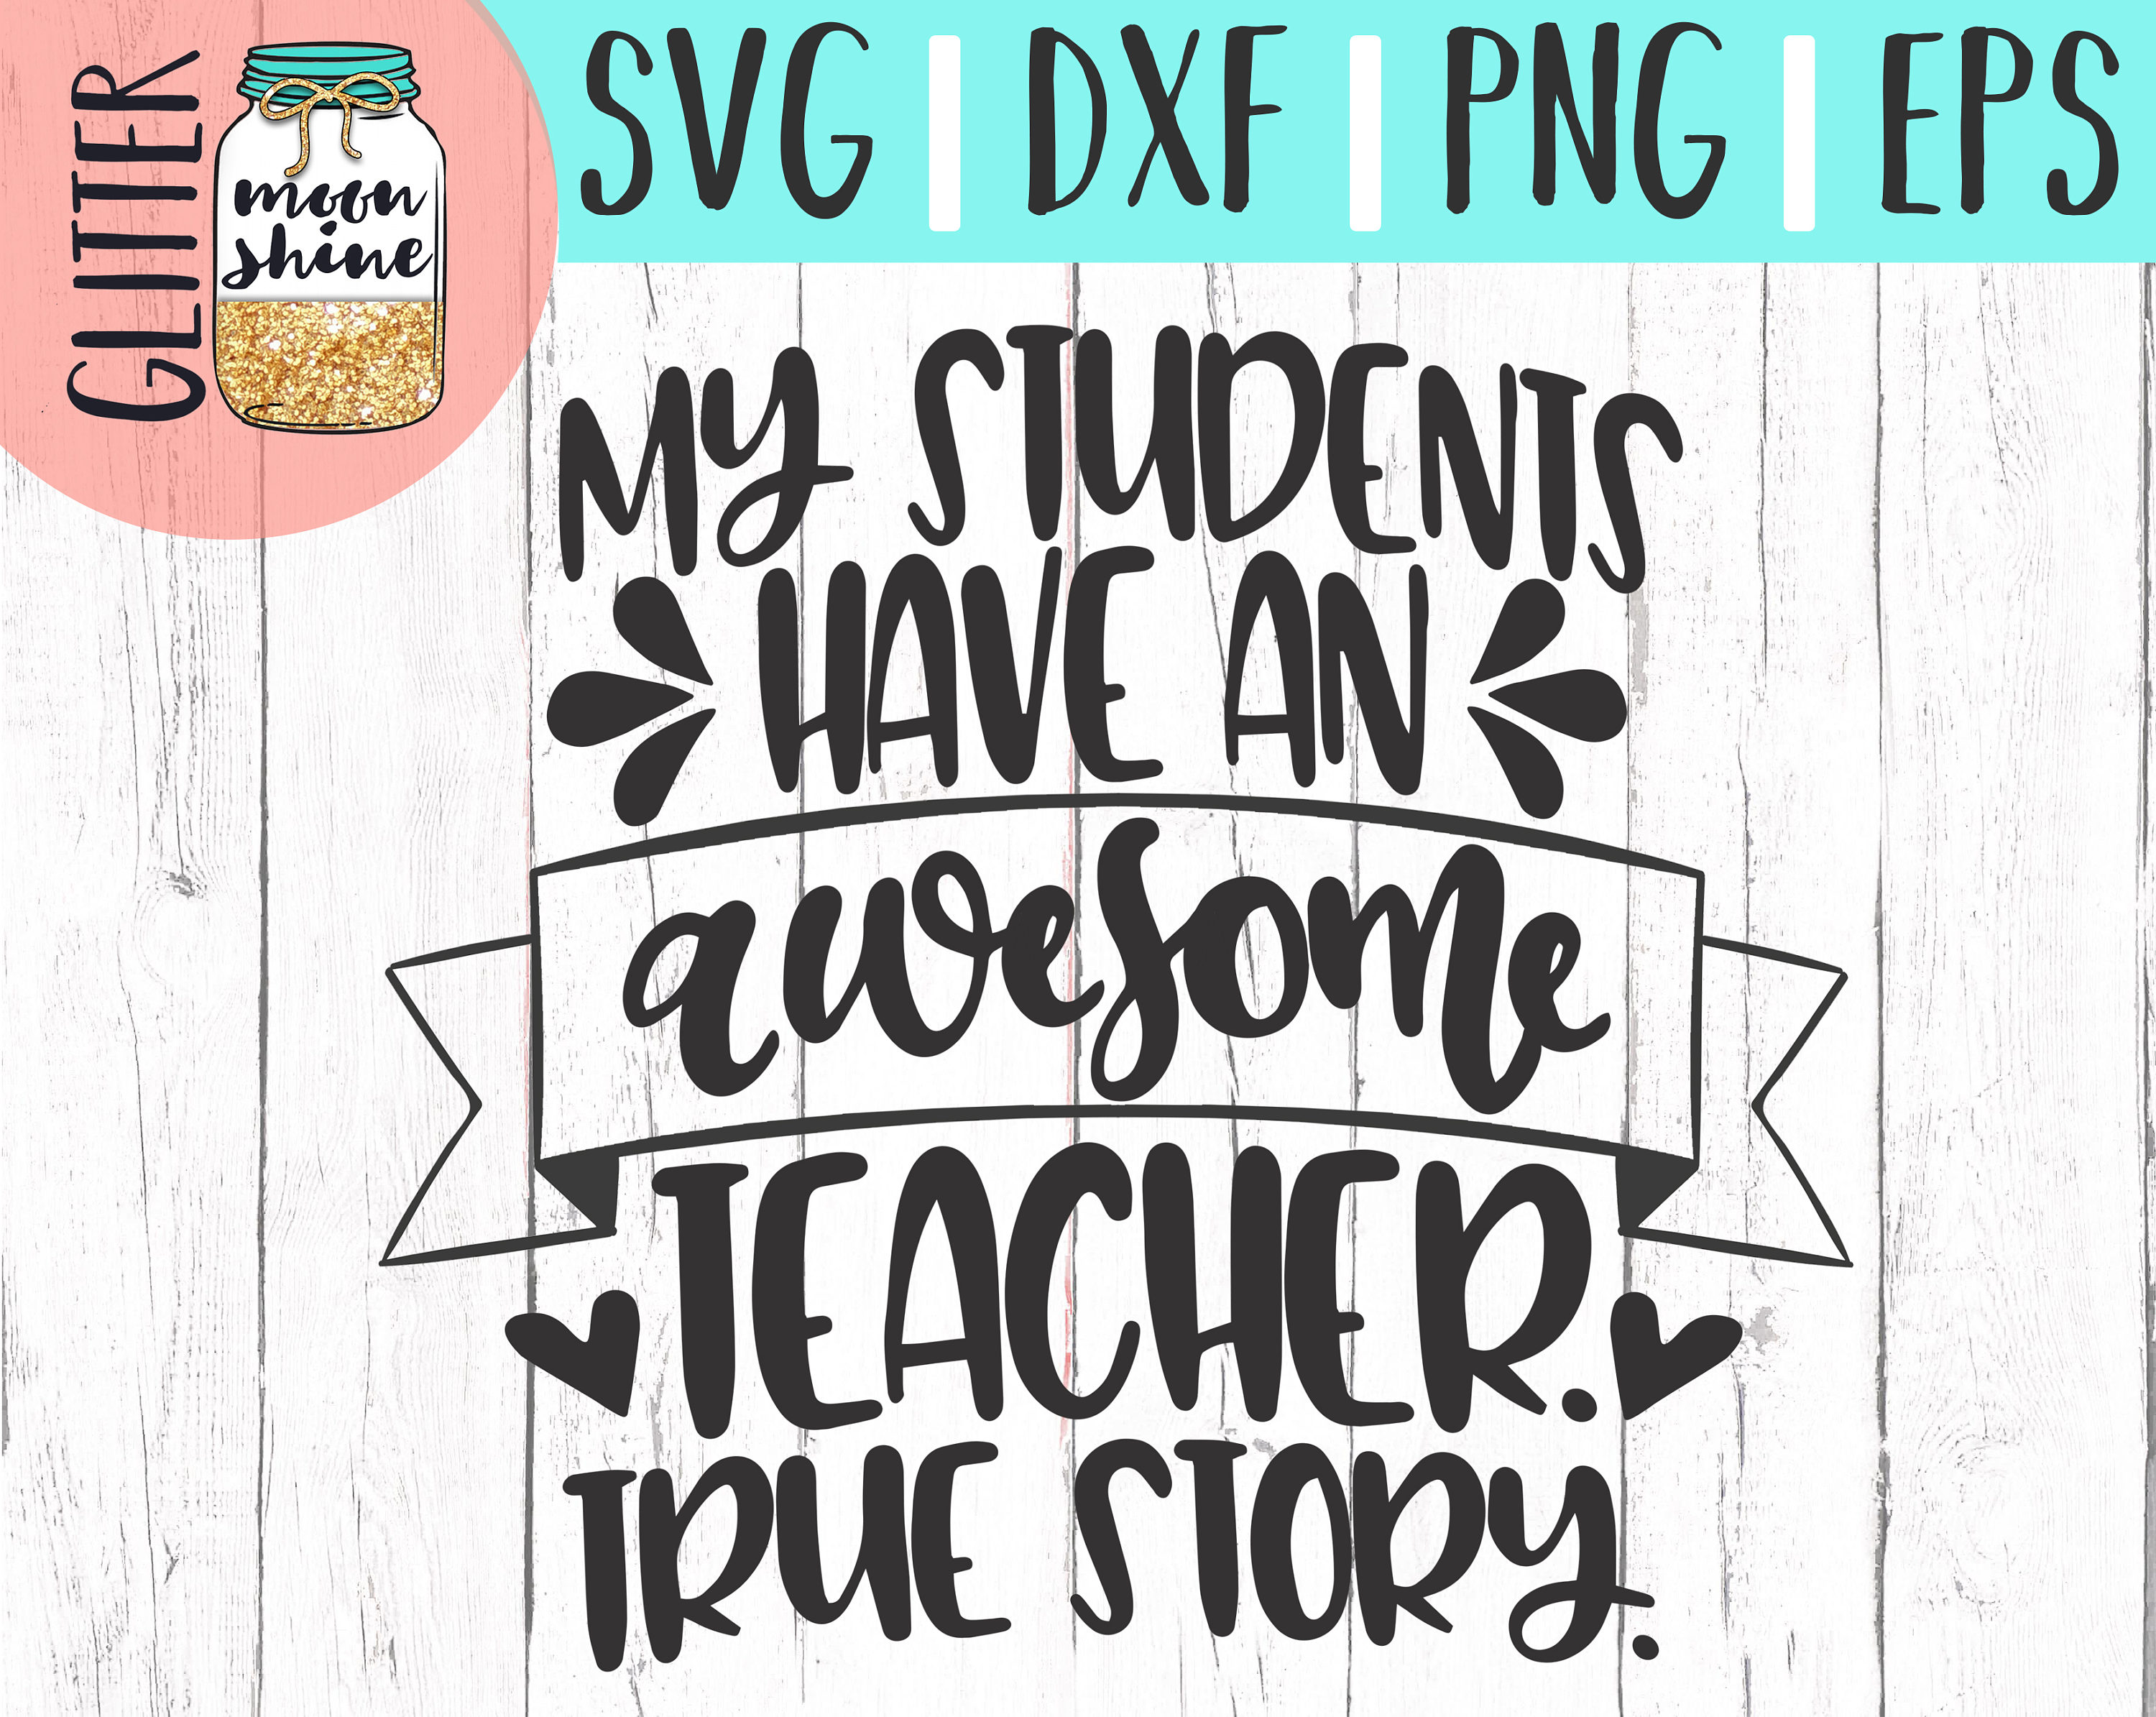 My Students Have An Awesome Teacher svg eps dxf png cutting